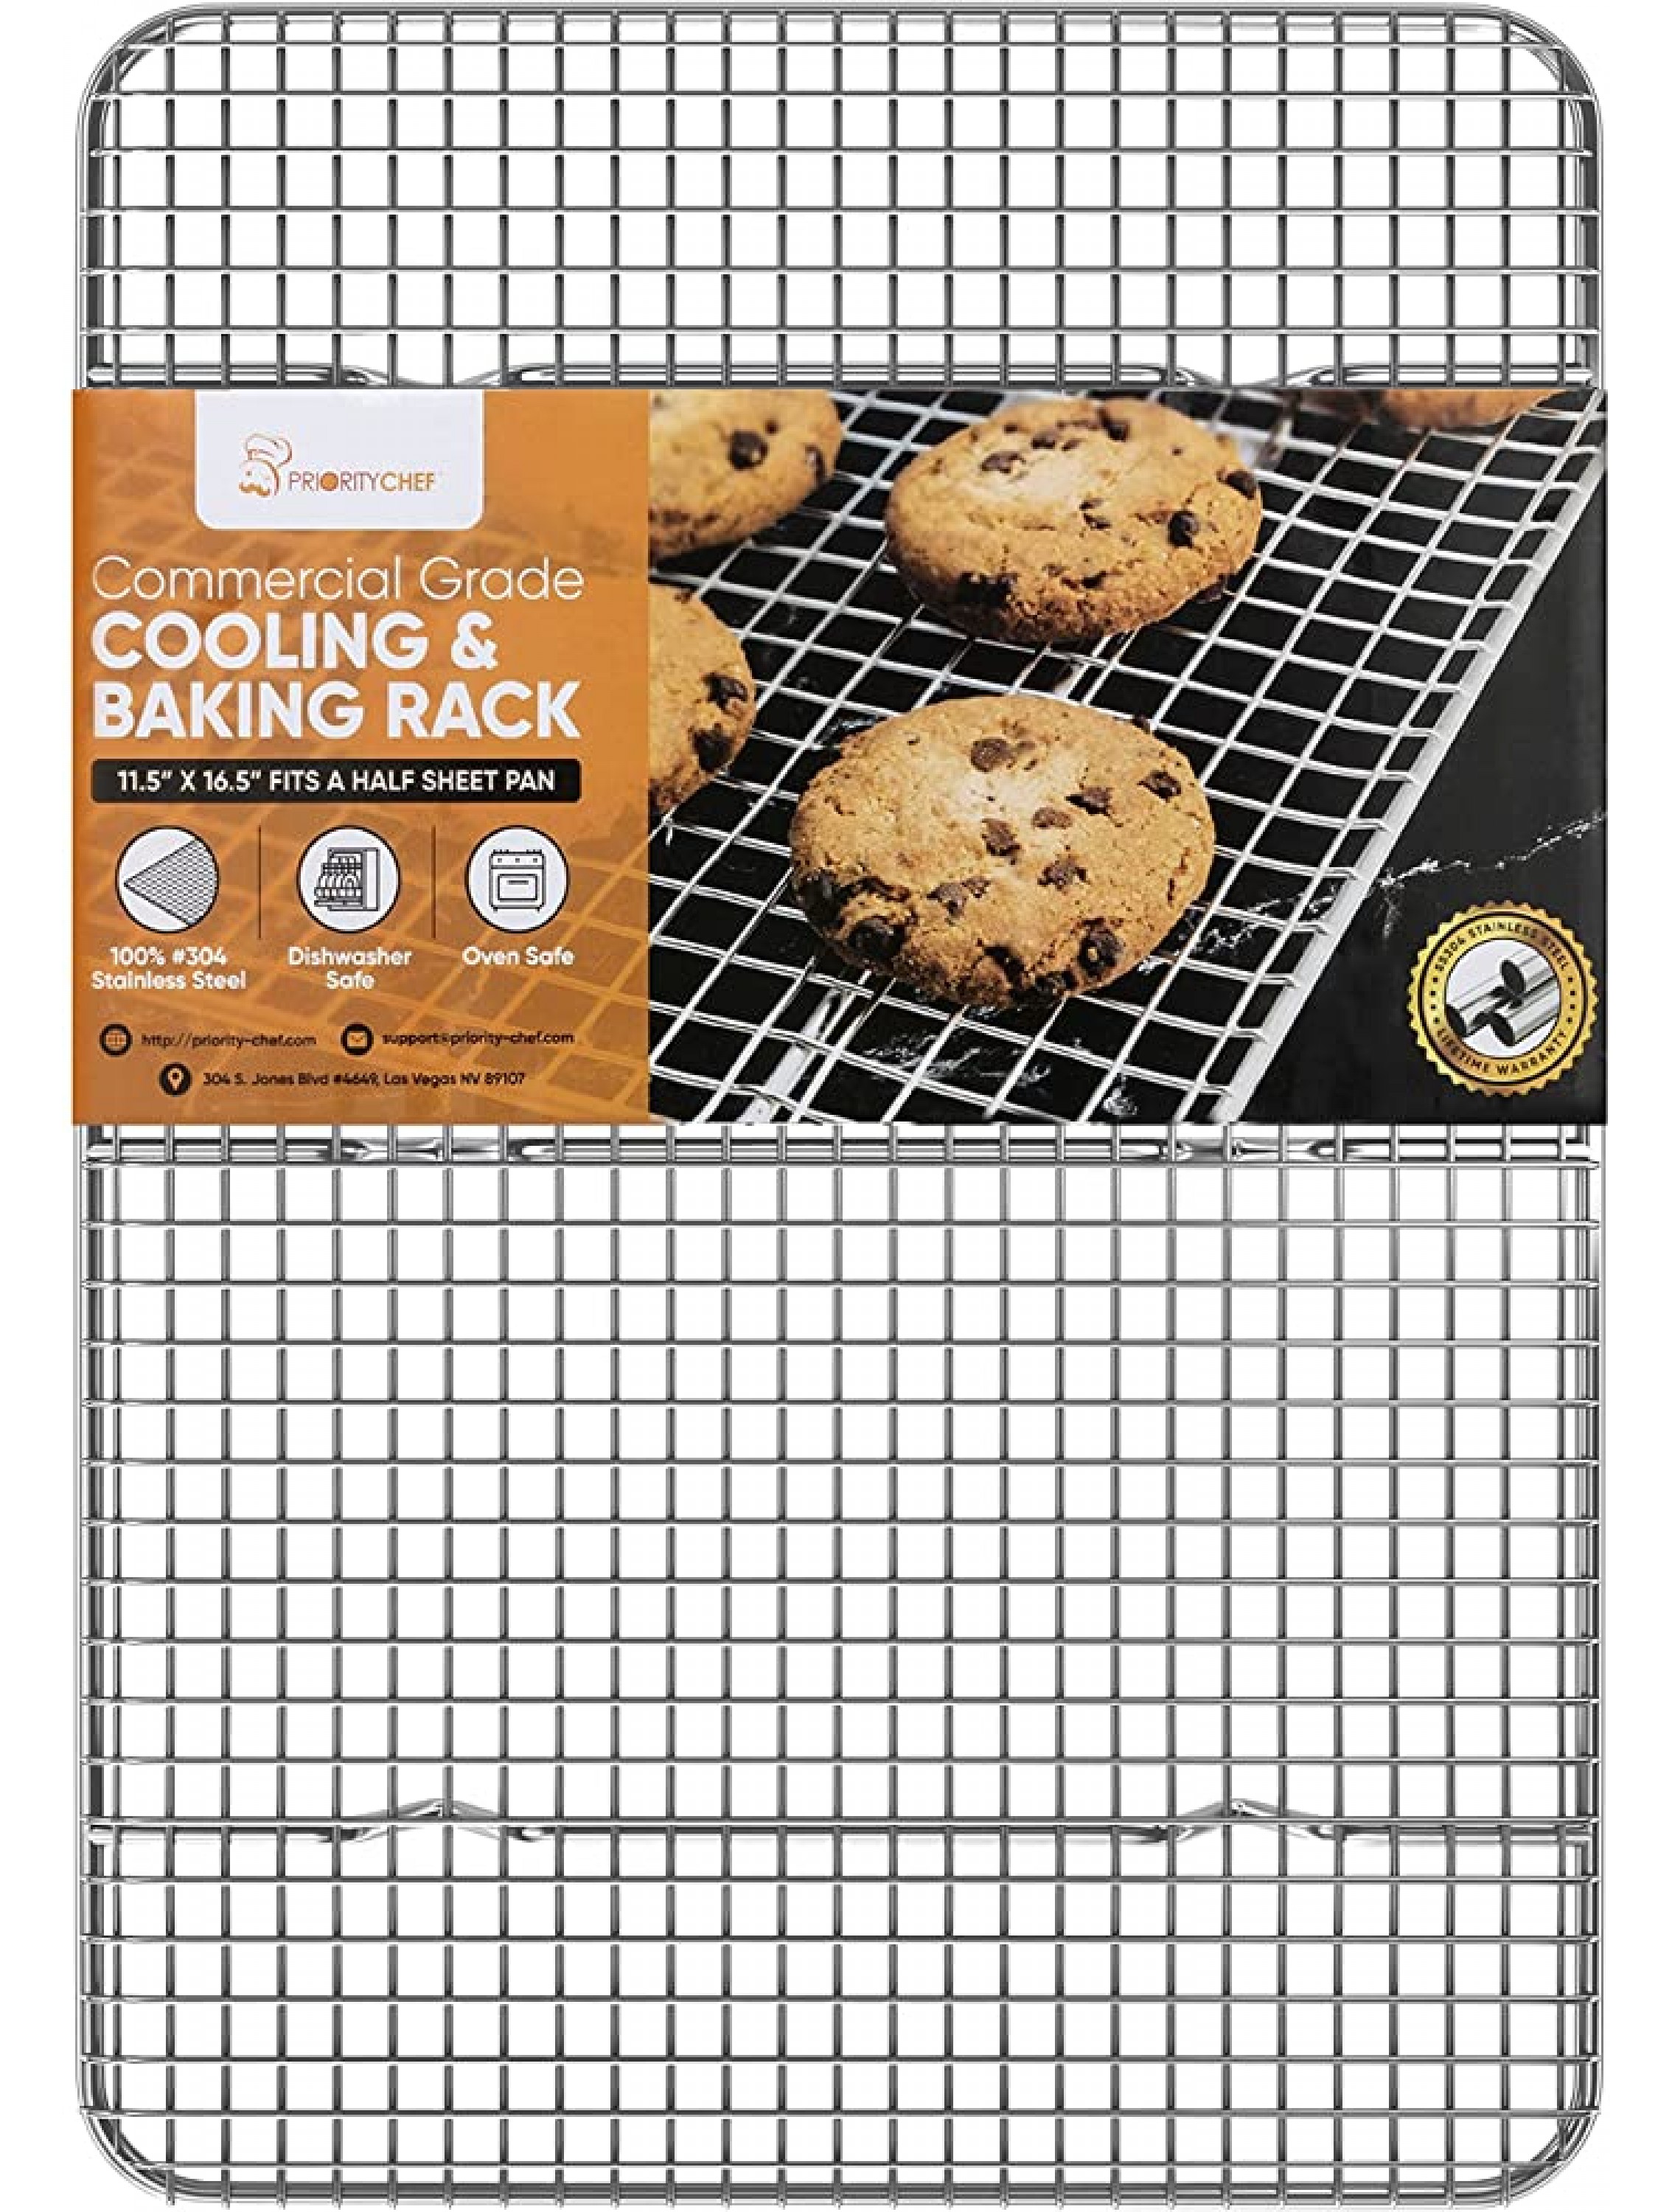 PriorityChef 18 8 Stainless Steel Cooling Rack Heavy Duty Baking Rack For Oven Cooking Fits Half Sheet Pan Wire Rack For Cooking Bacon Cookie Cooling Rack 11.5 x 16.5 - B8U46RY8G